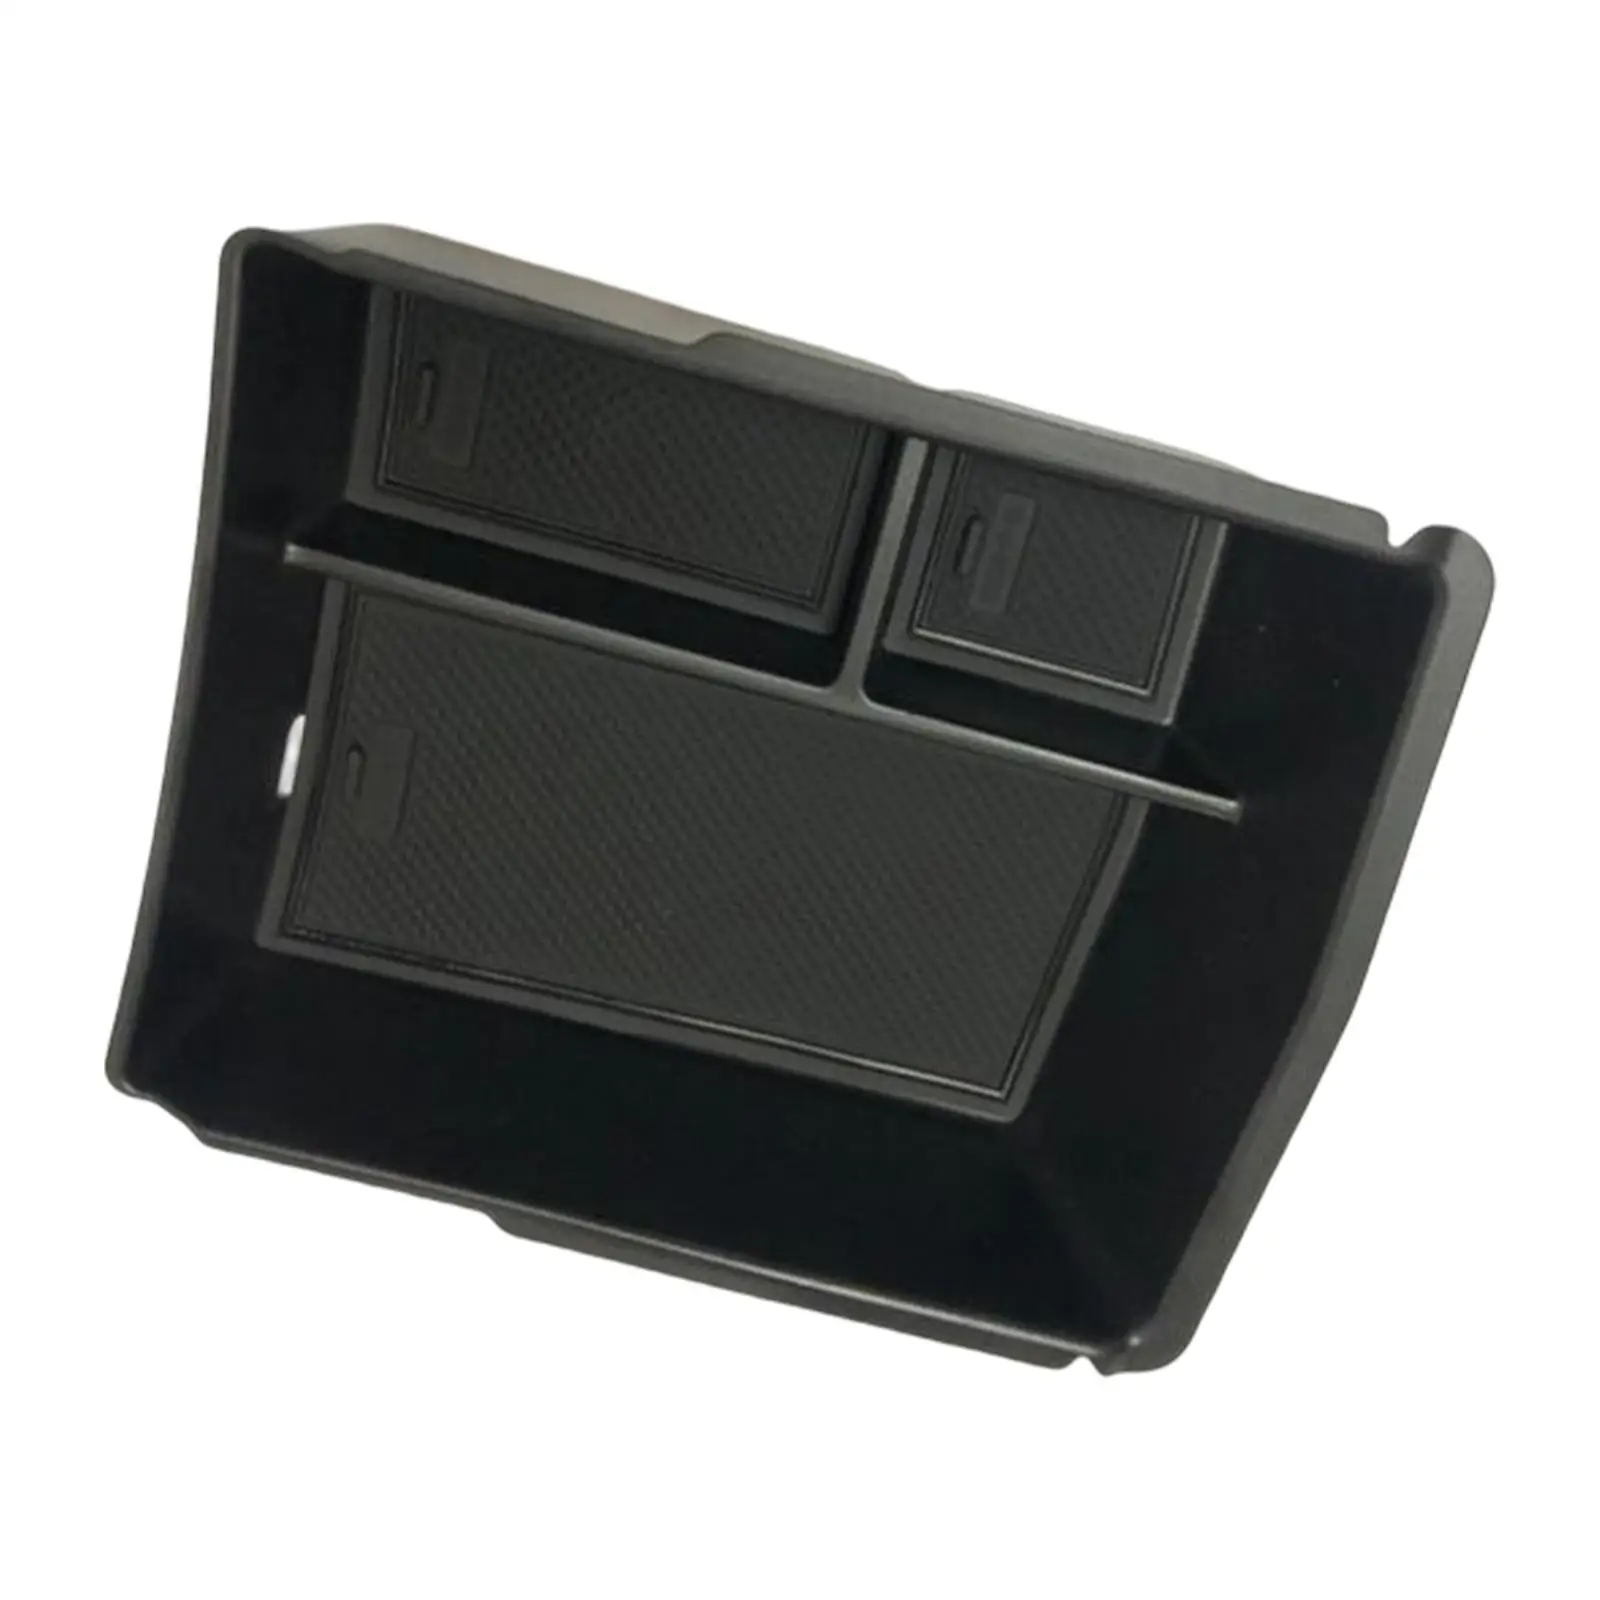 Center Console Armrest Storage Box Replaces Practical Container for Song Plus Dmi EV